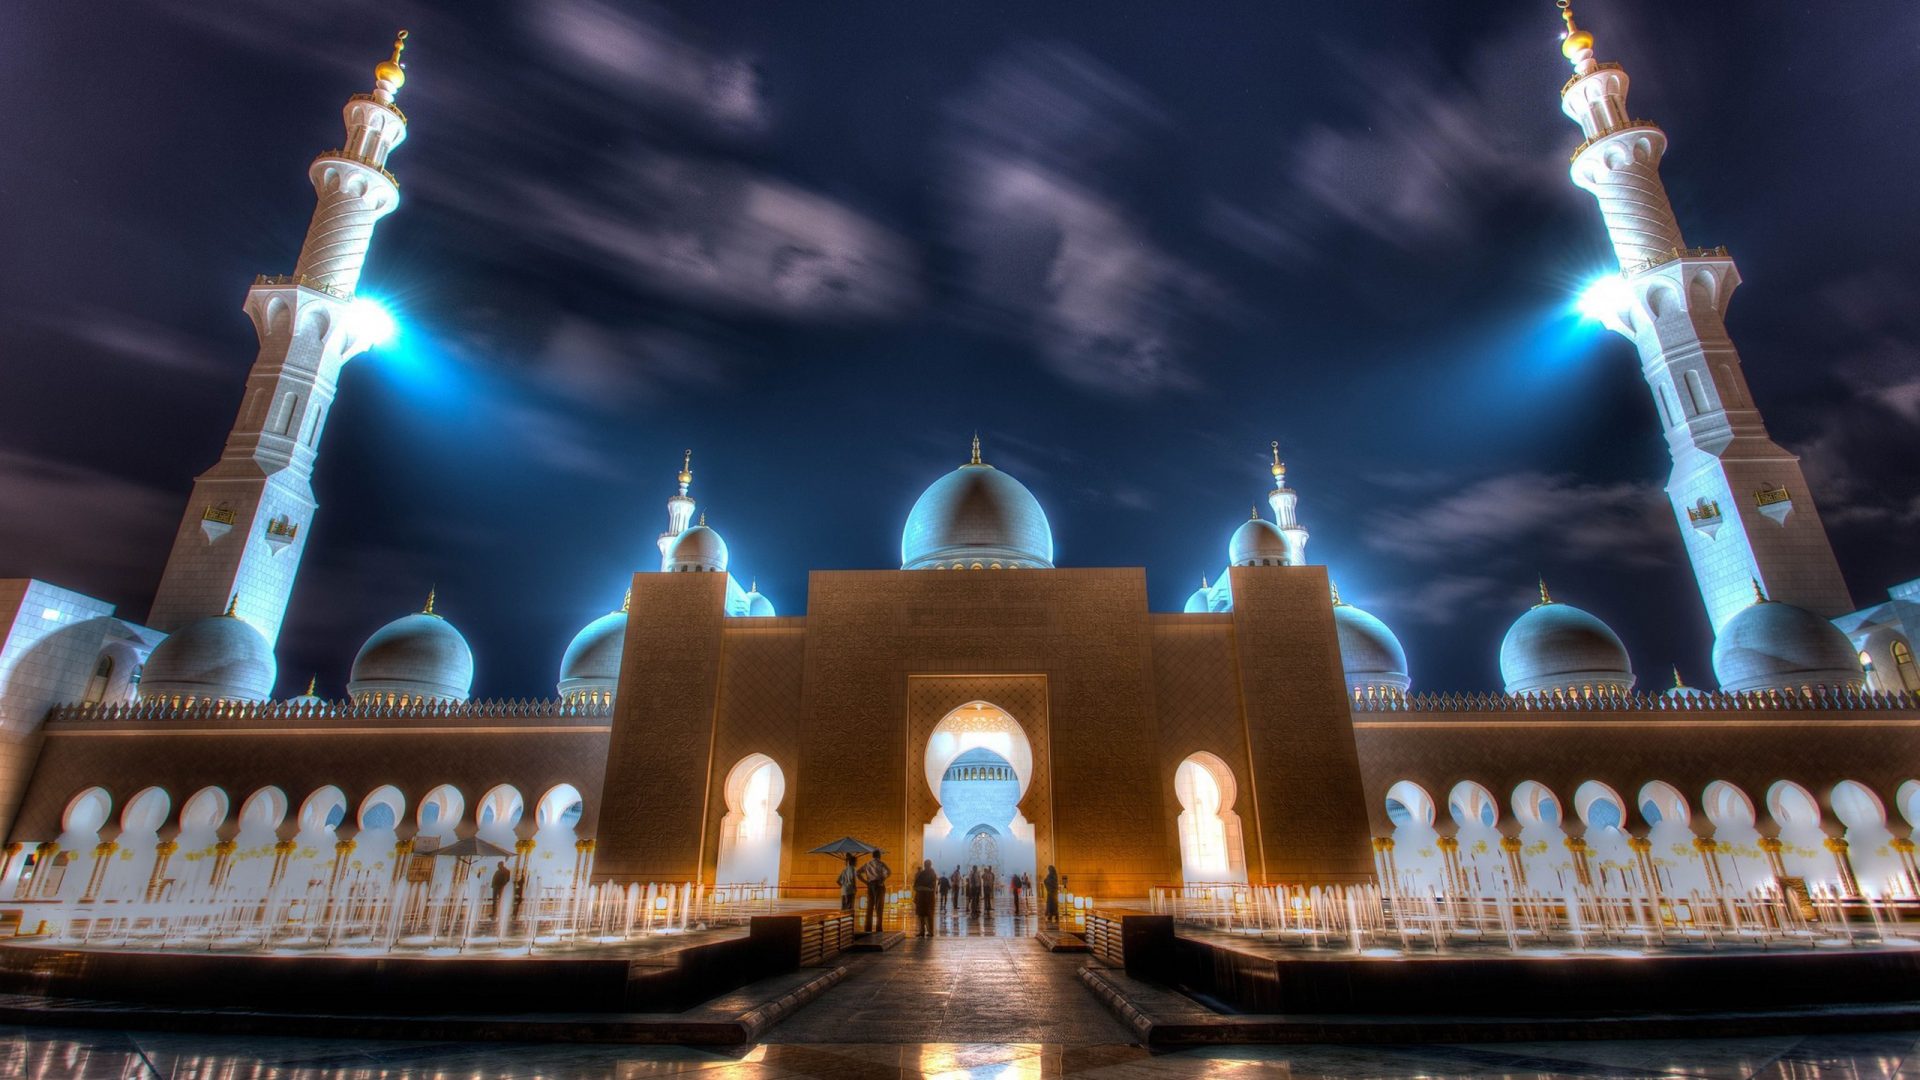 emirates wallpaper hd,landmark,mosque,place of worship,holy places,architecture